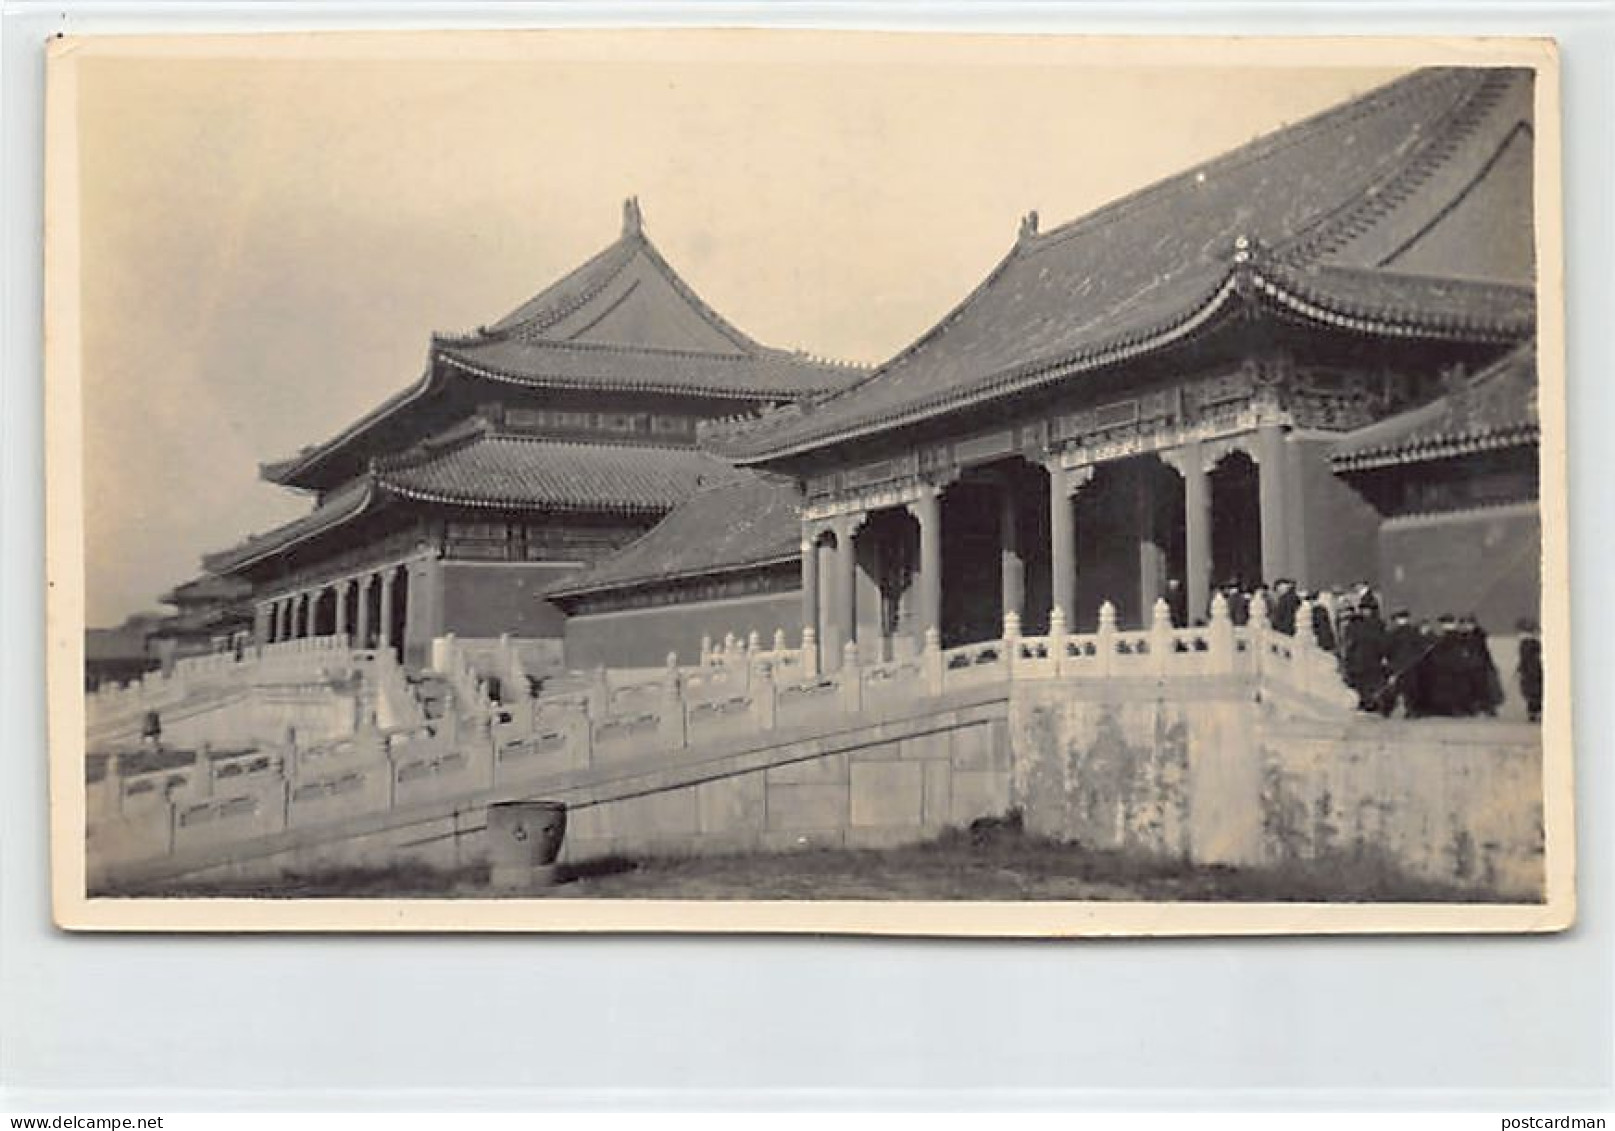 China - BEIJING - The Bridges And Entrance Of The Ancient Imperial Palaces - PHOTOGRAPH - Publ. Unknown  - China